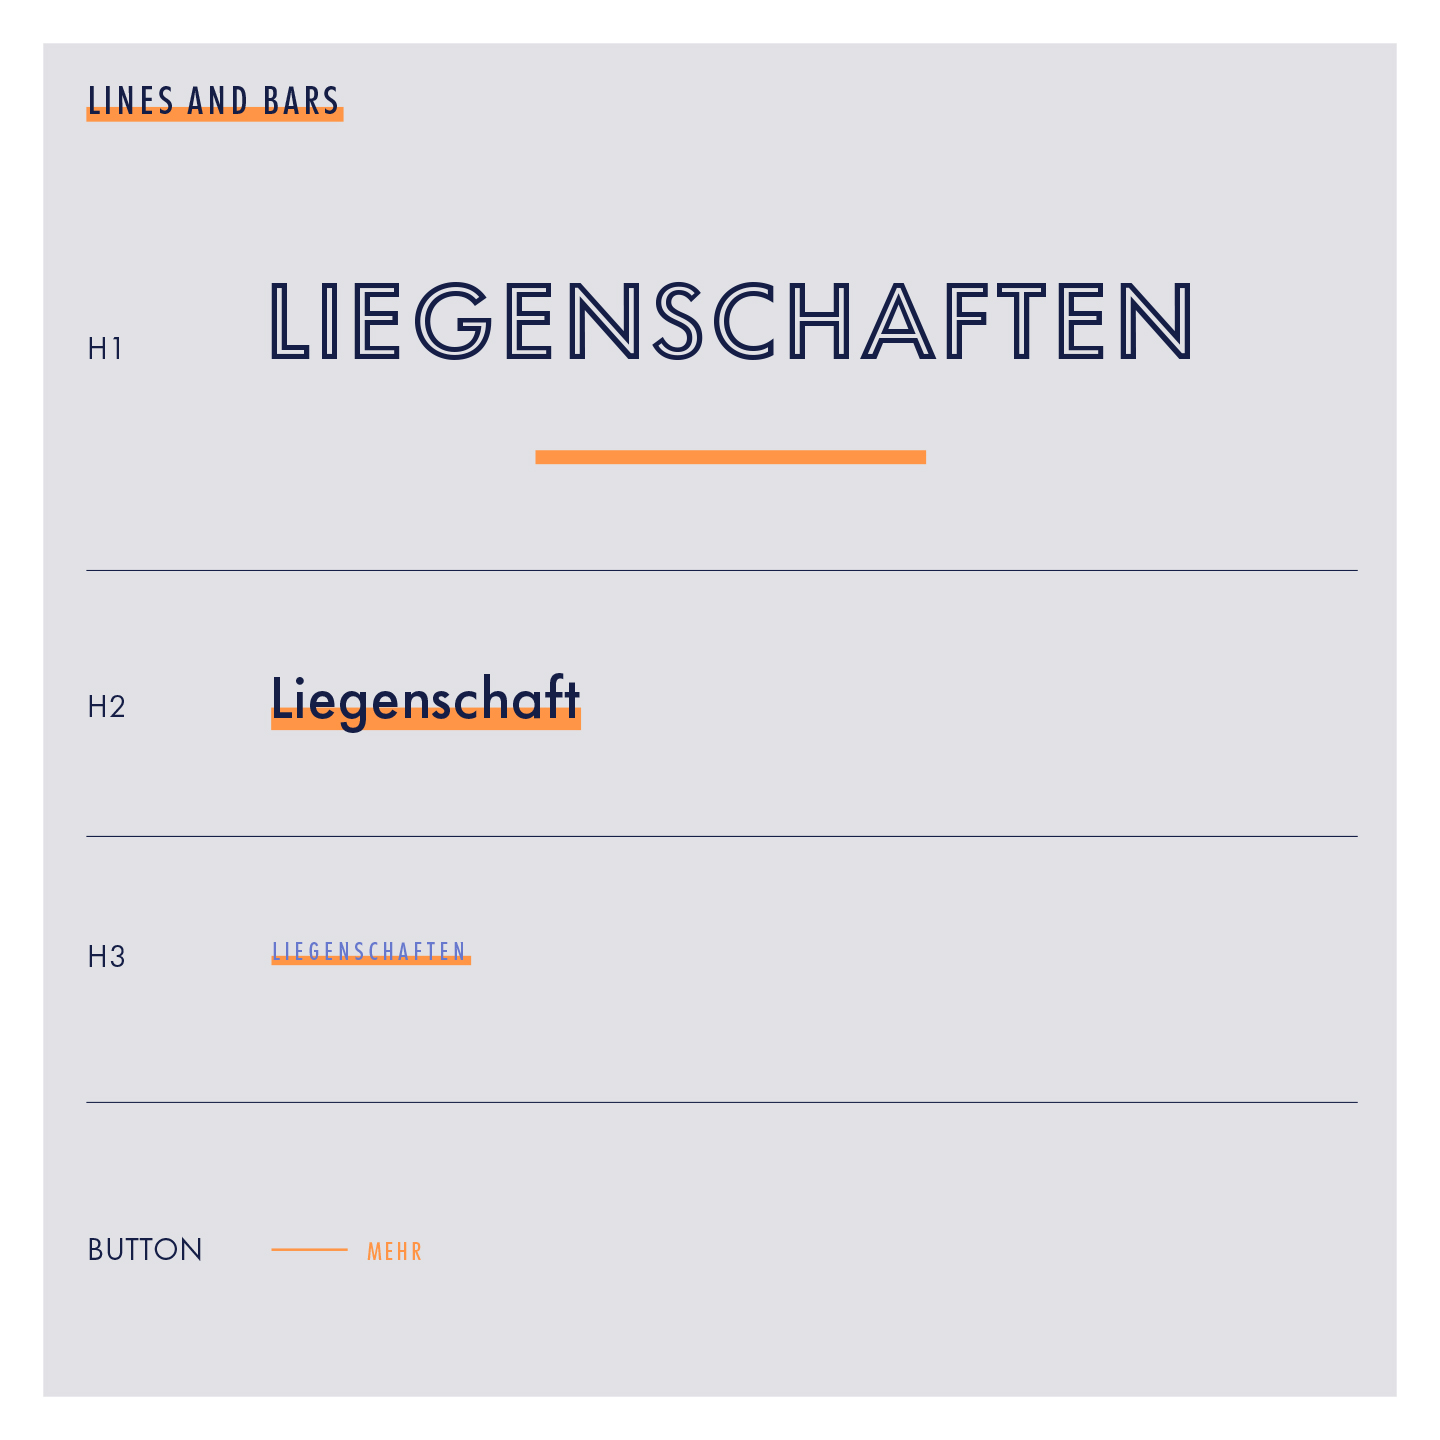 Titles and lines for the web design of WE Emmen